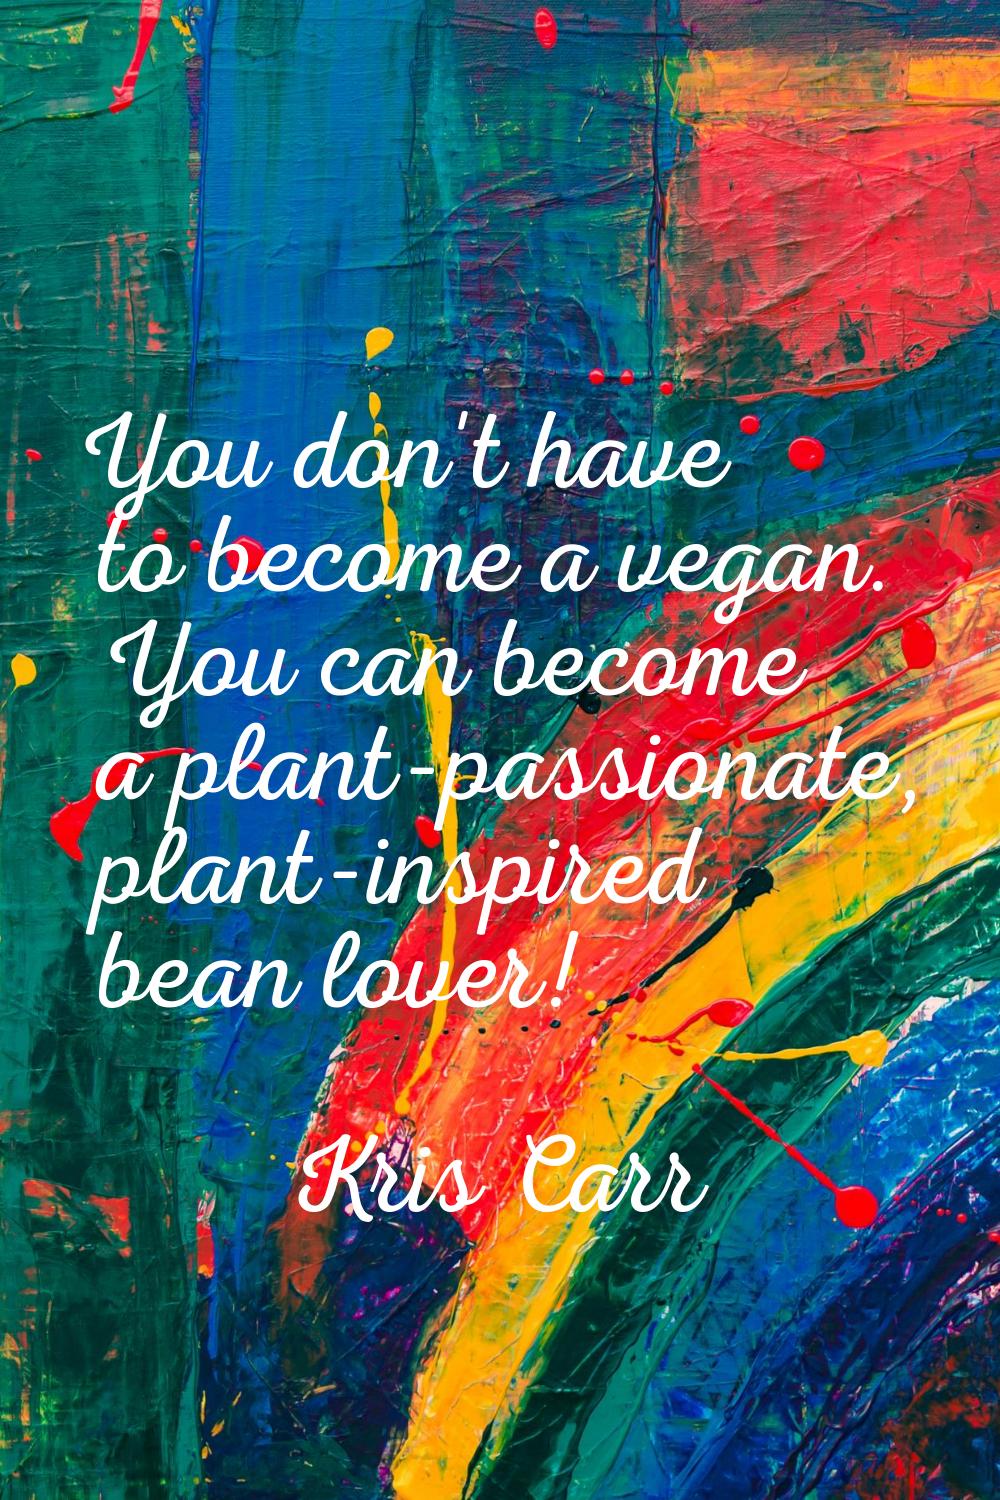 You don't have to become a vegan. You can become a plant-passionate, plant-inspired bean lover!